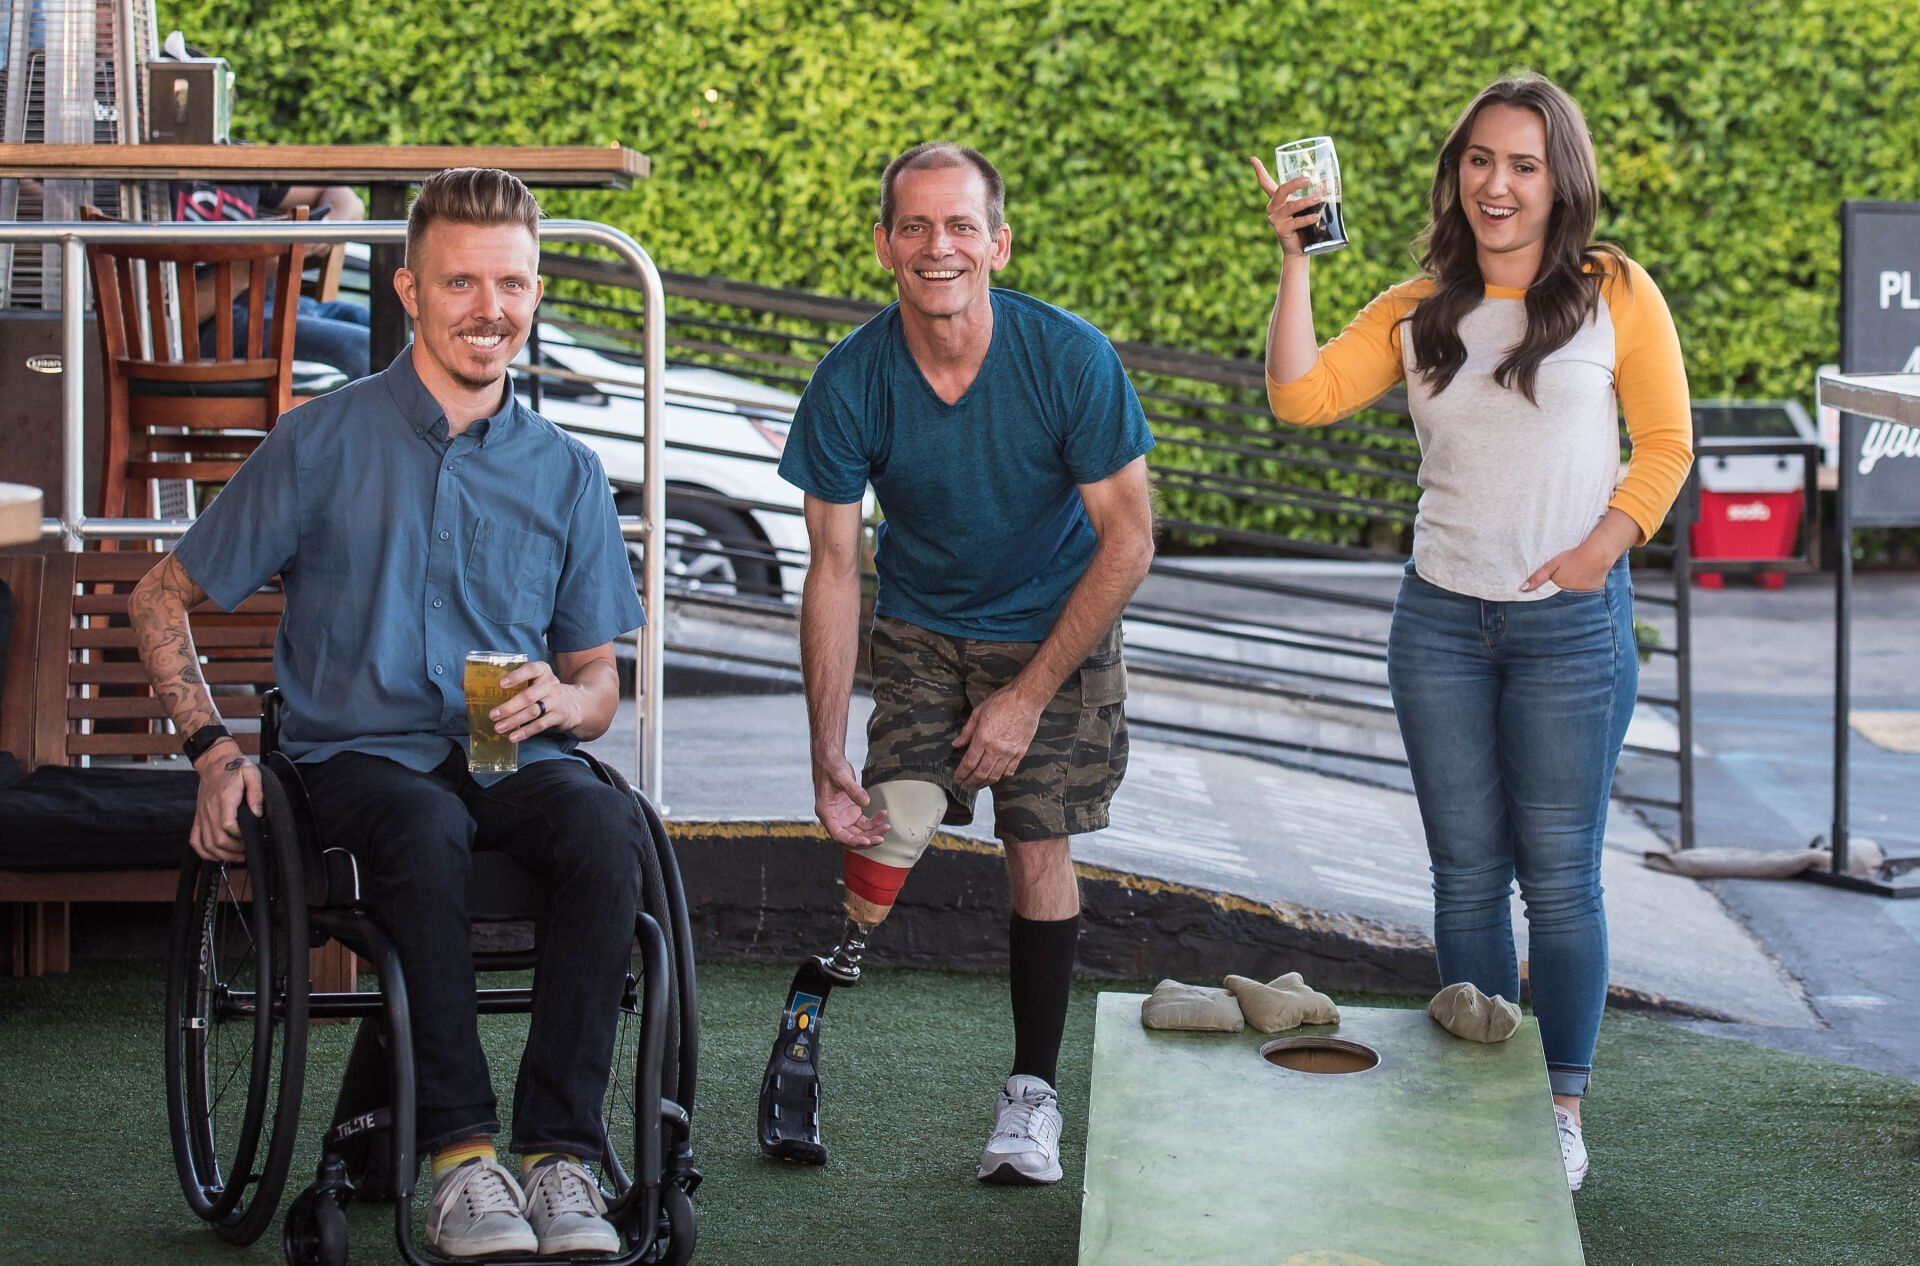 Three individuals with disabilities smiling and engaging with each other, showcasing a sense of community and support.